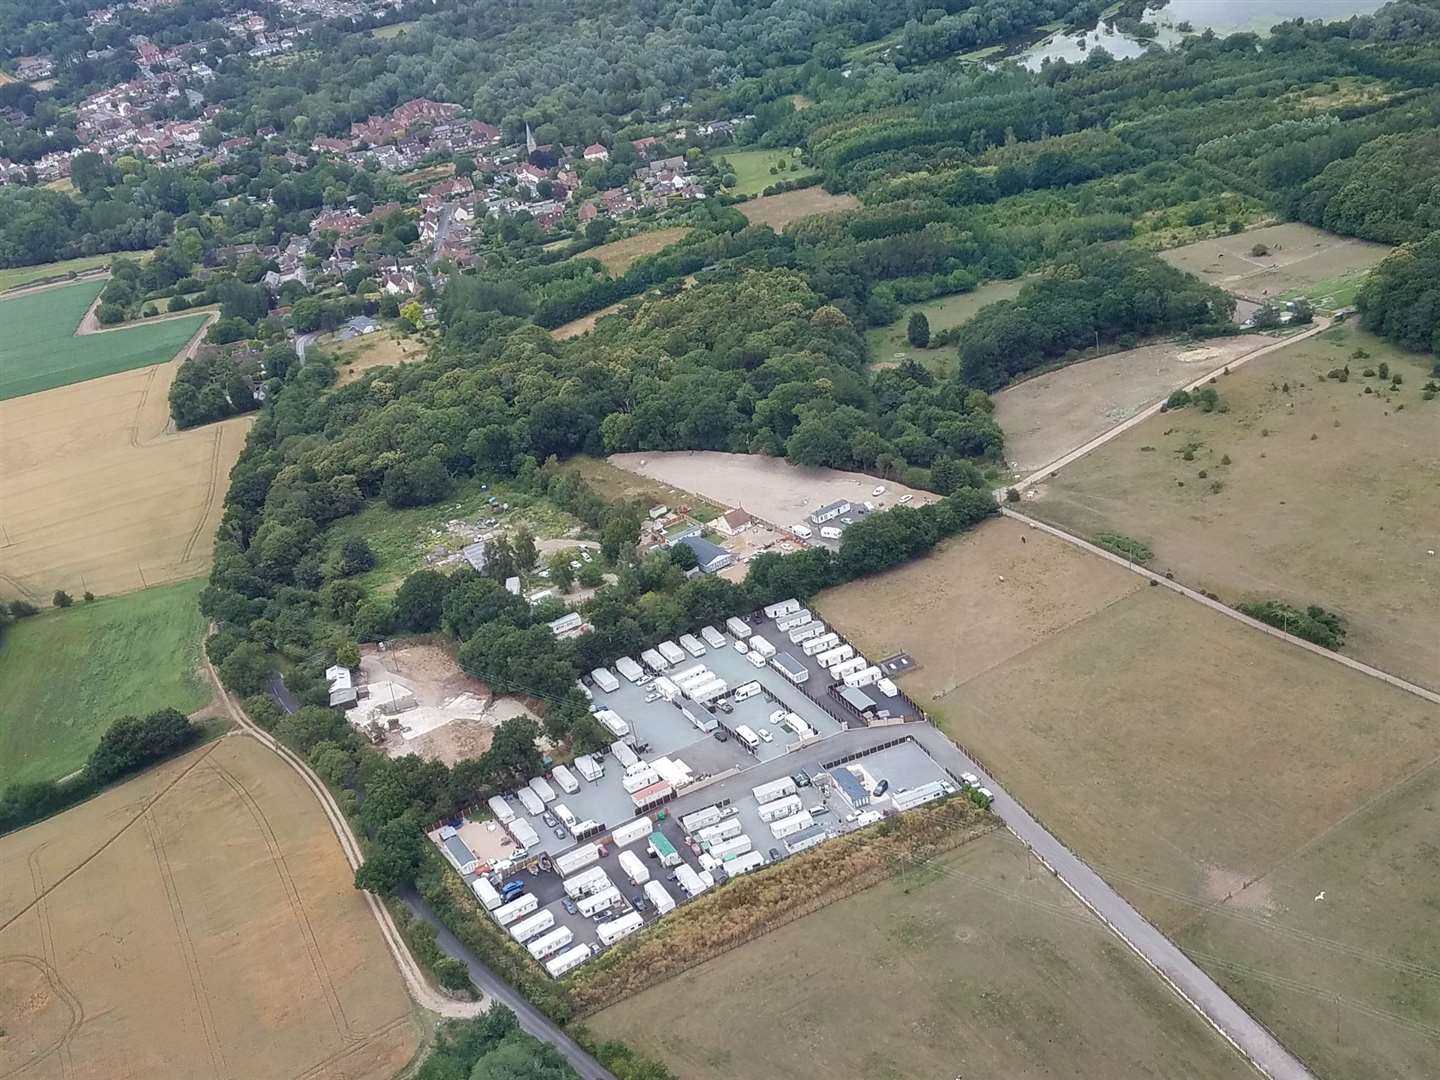 Moate Farm in Fordwich had been expanded without planning permission